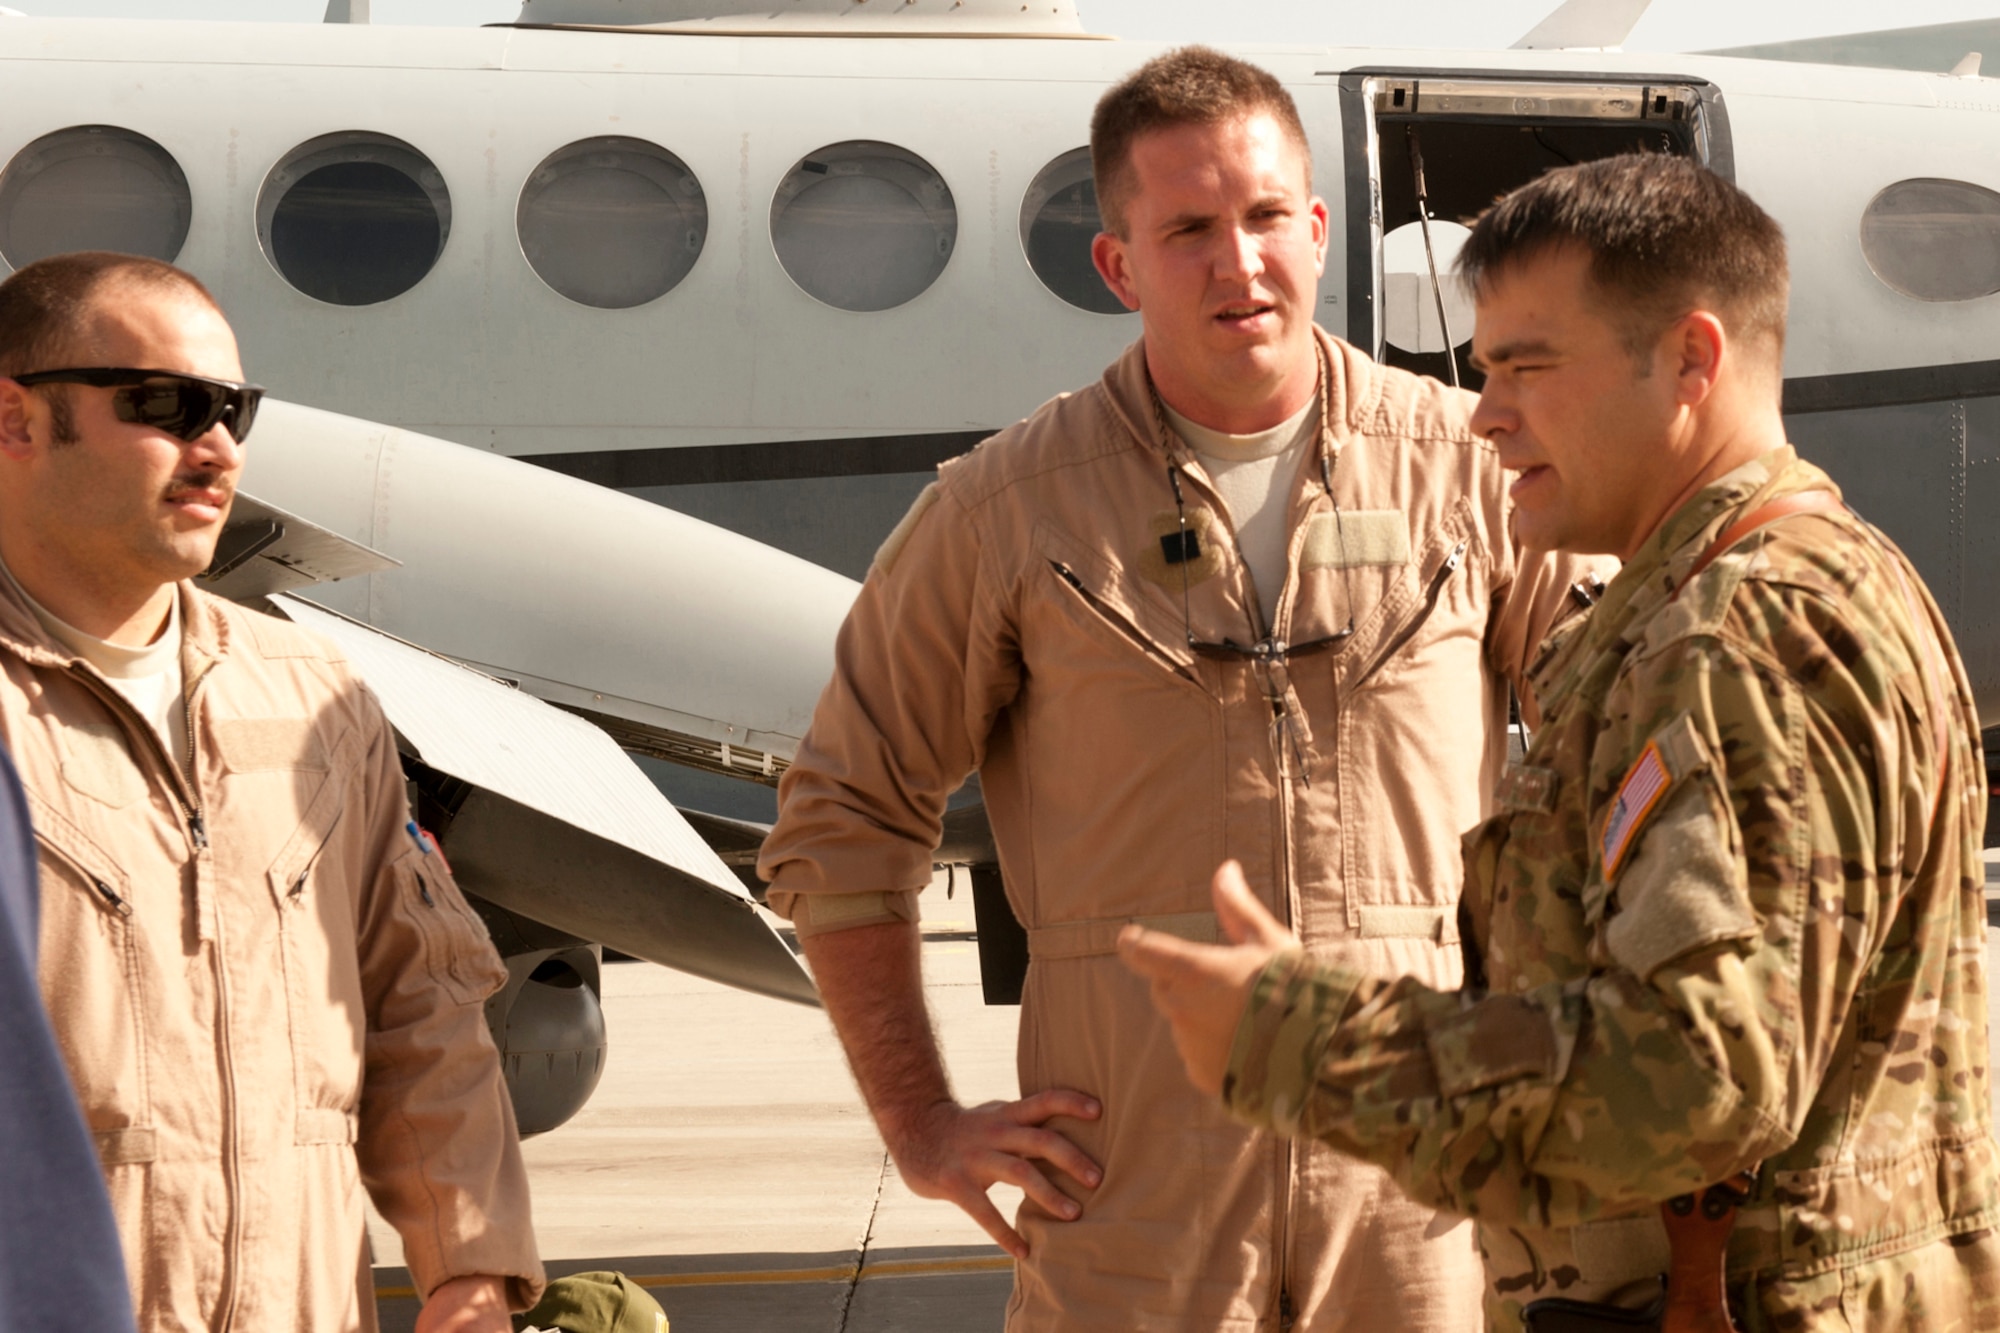 Lt. Col. Jeffrey Alexander (right), Commander 4th Expeditionary Reconnaissance Squadron, talks to crew members of an MC-12 Liberty after returning from a mission at Bagram Airfield, Afghanistan, September 11, 2012. The conclusion of this mission marks a milestone, as it signifies the 4 ERS officially exceeding over 100,000 flying hours using the MC-12s since the unit was stood up in Dec. 2009. 100,000 flying hours roughly equates to 11 and a-half years of flying for one the aircraft. 4 ERS leadership can say they accomplished this feat in under three years using its fleet of MC-12s. (U.S. Air Force photo/1st Lt. Marlene Solano)